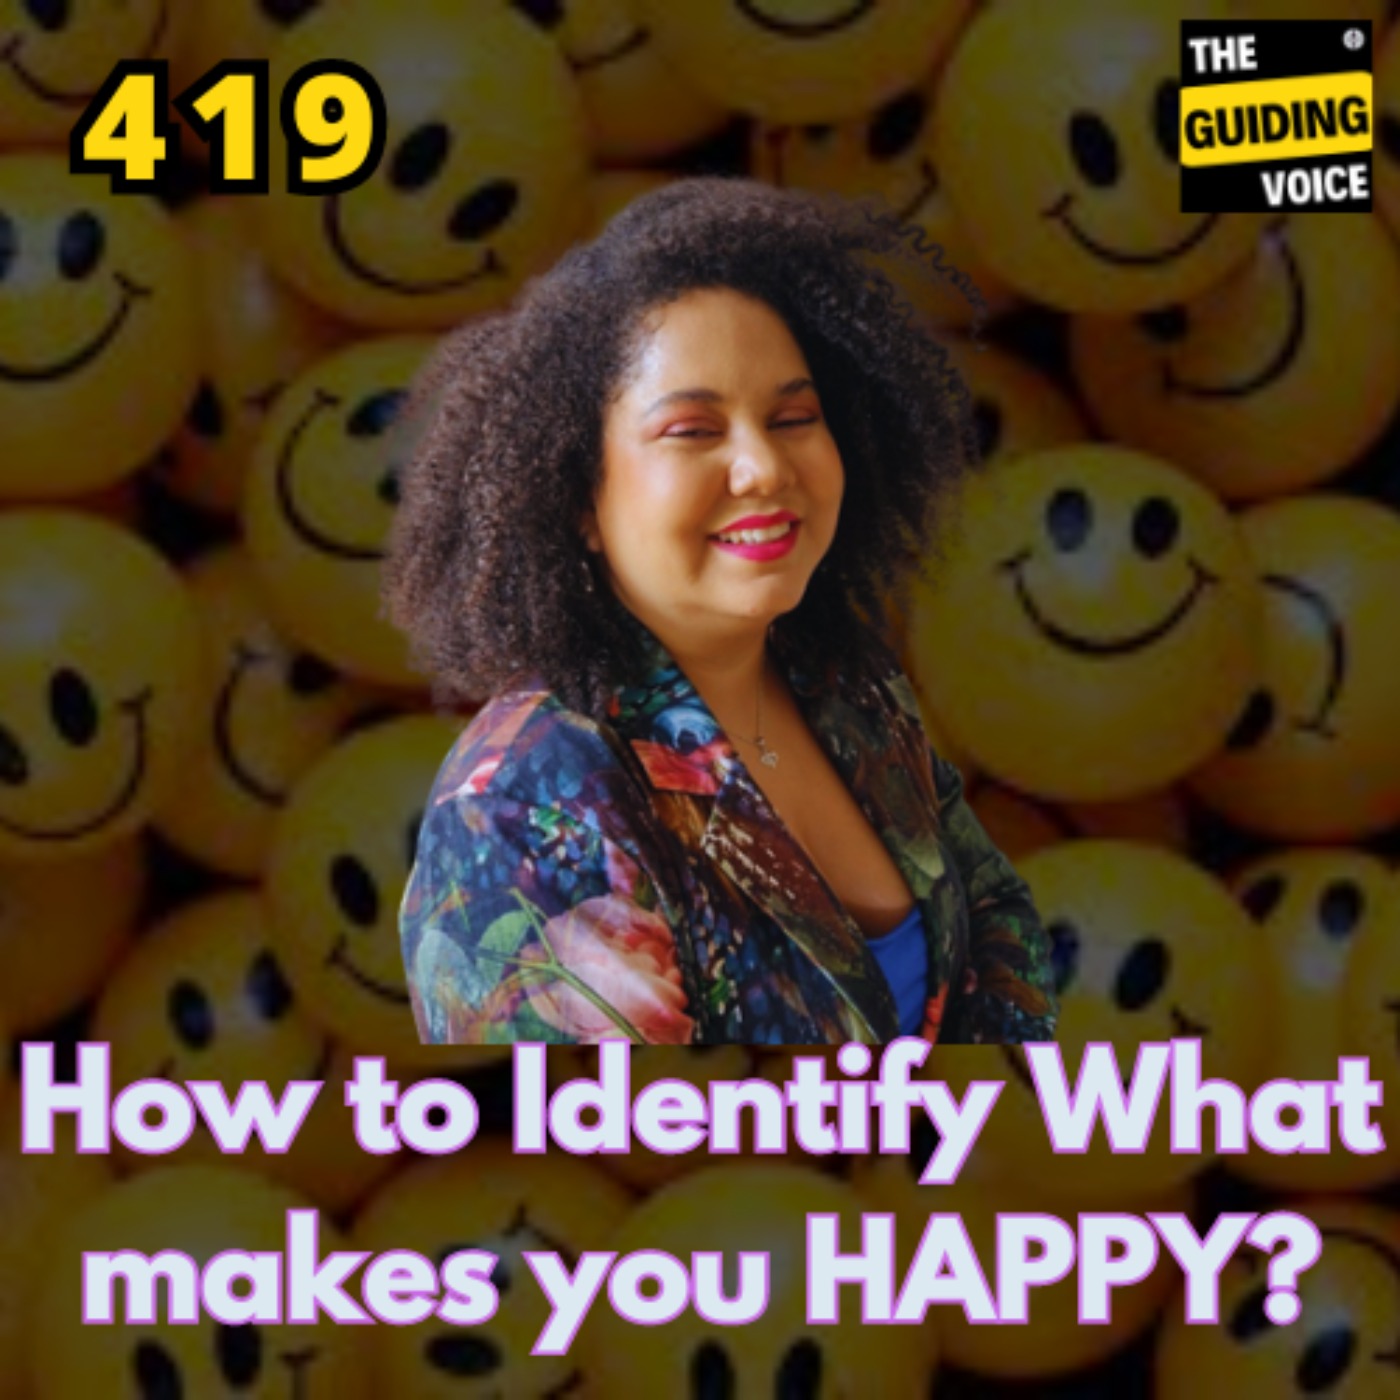 How to identify what makes you happy and how to build a routine around it? | #TGVGlobalSpeakerFestival | Zaynab Settimi | #TGV419